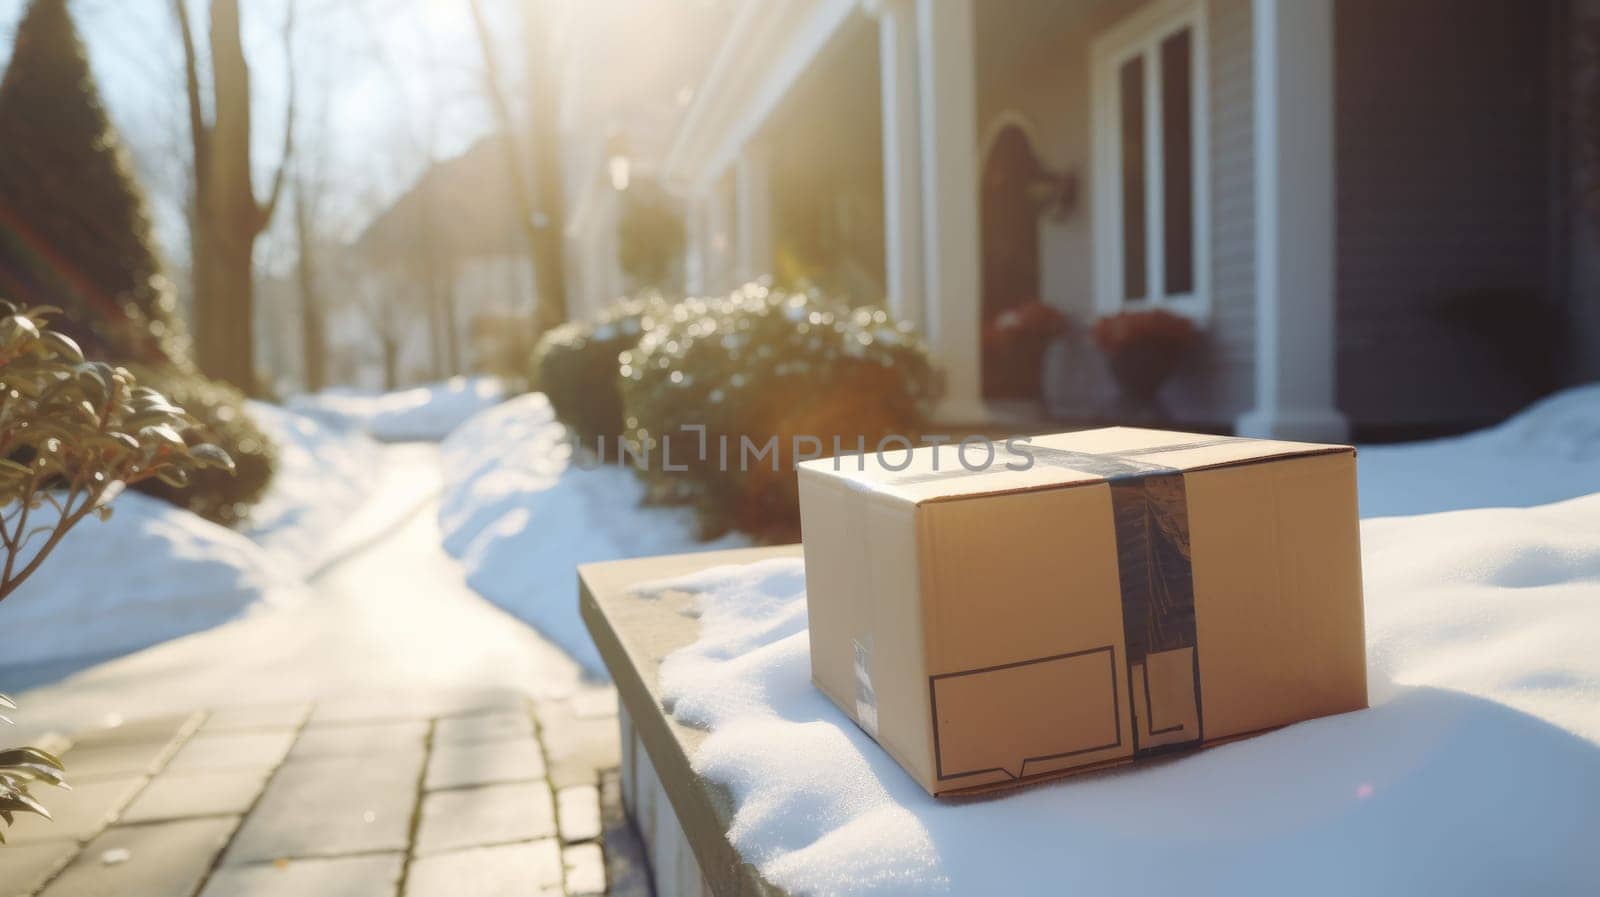 Delivered parcel box on door mat near winter snow entrance. Christmas online shopping. Black Friday sale. by JuliaDorian